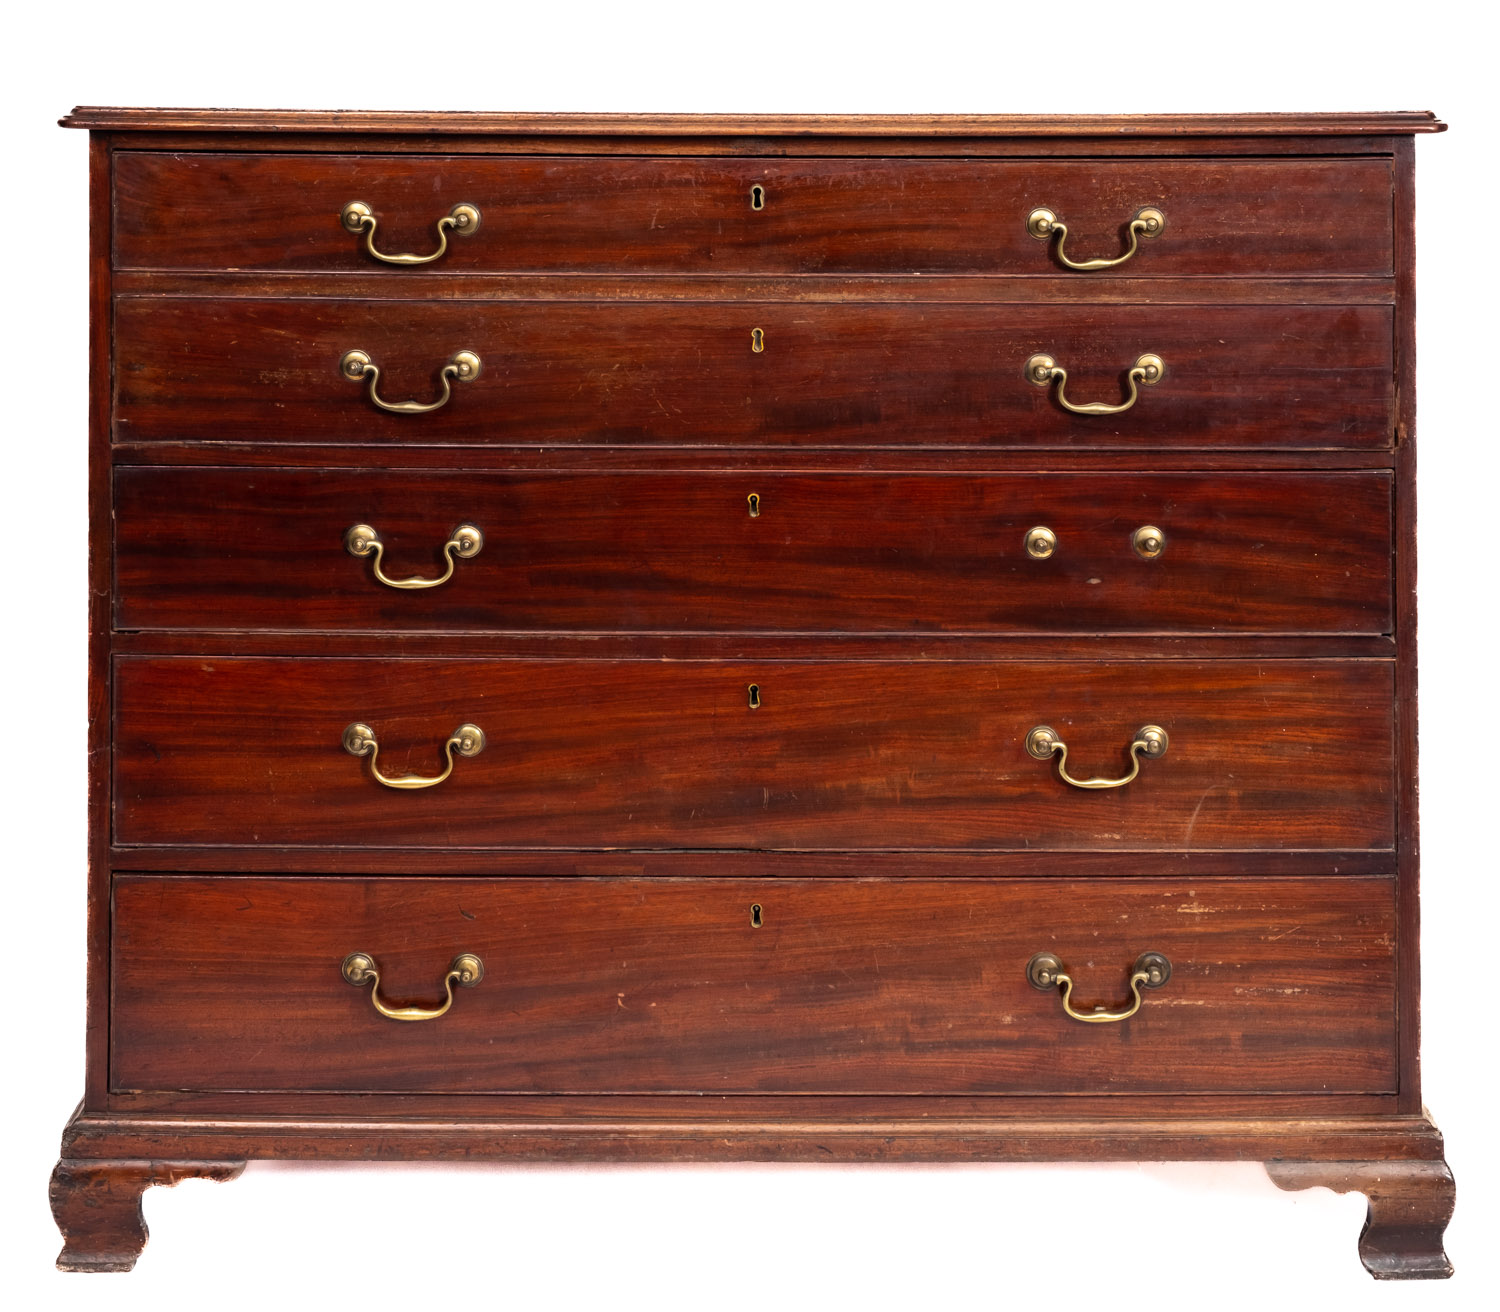 A George III mahogany secretaire chest, circa 1810, the top with a moulded edge,